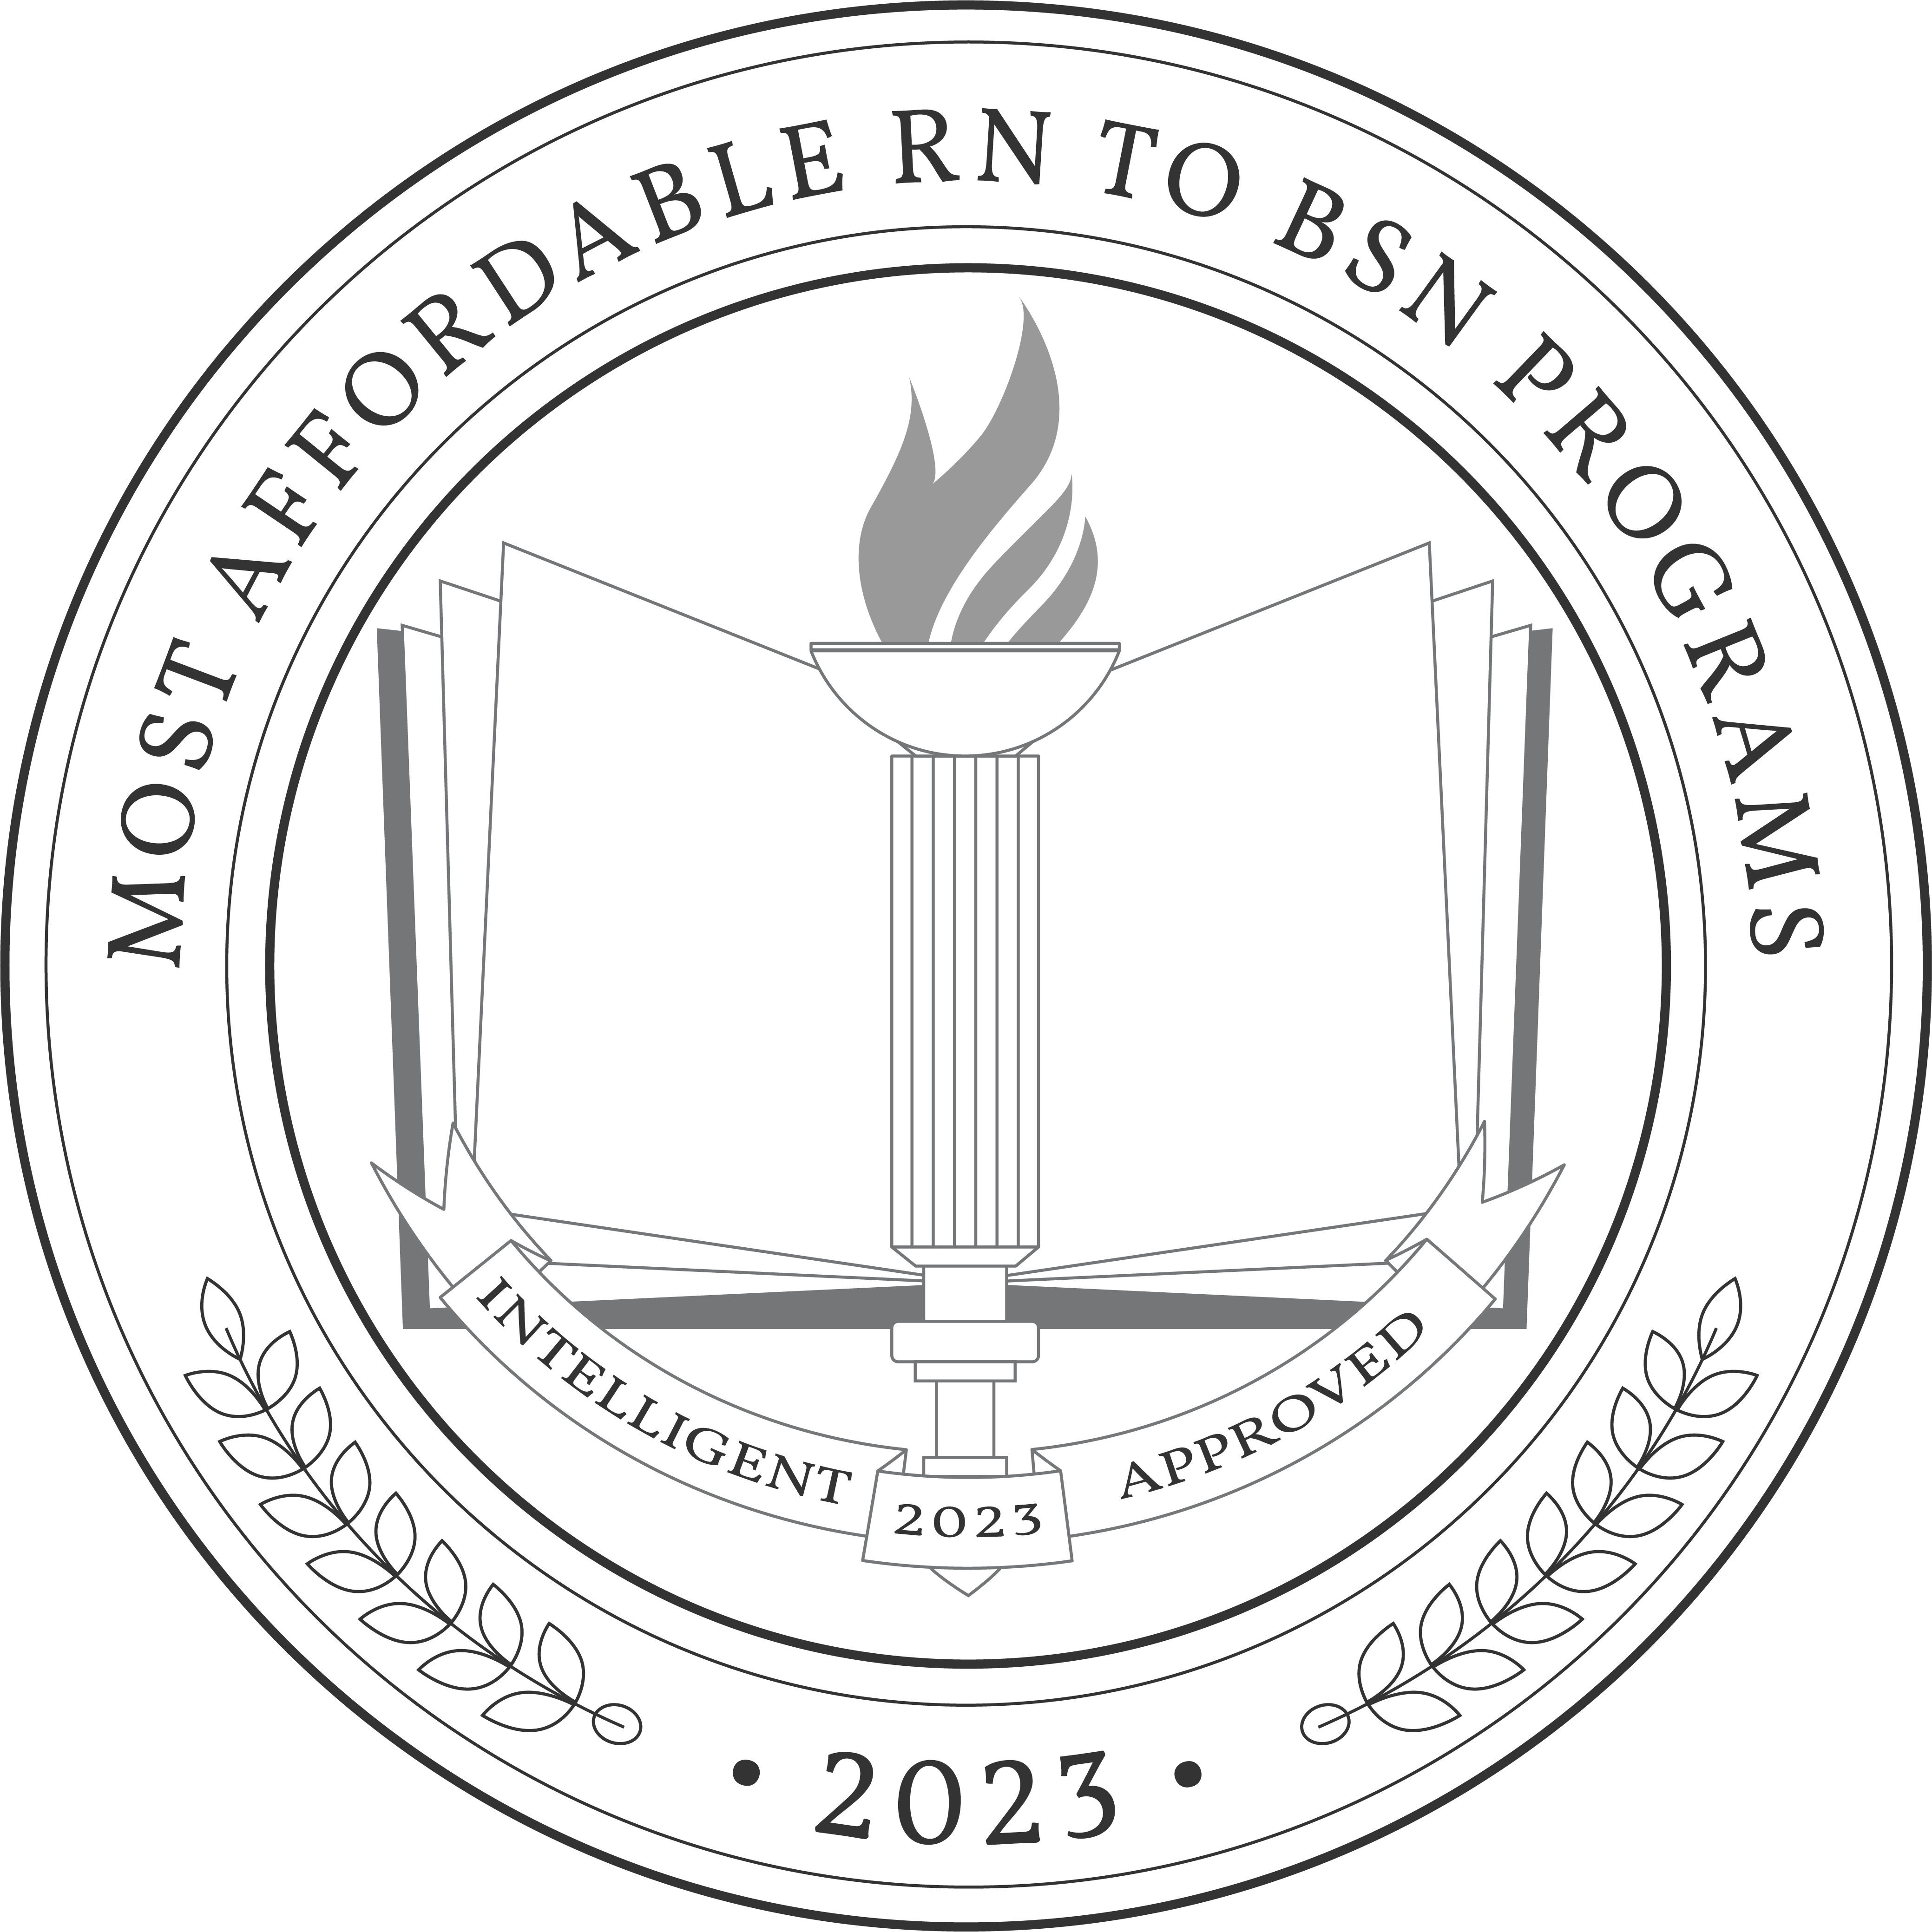 Most Affordable RN to BSN Programs 2023